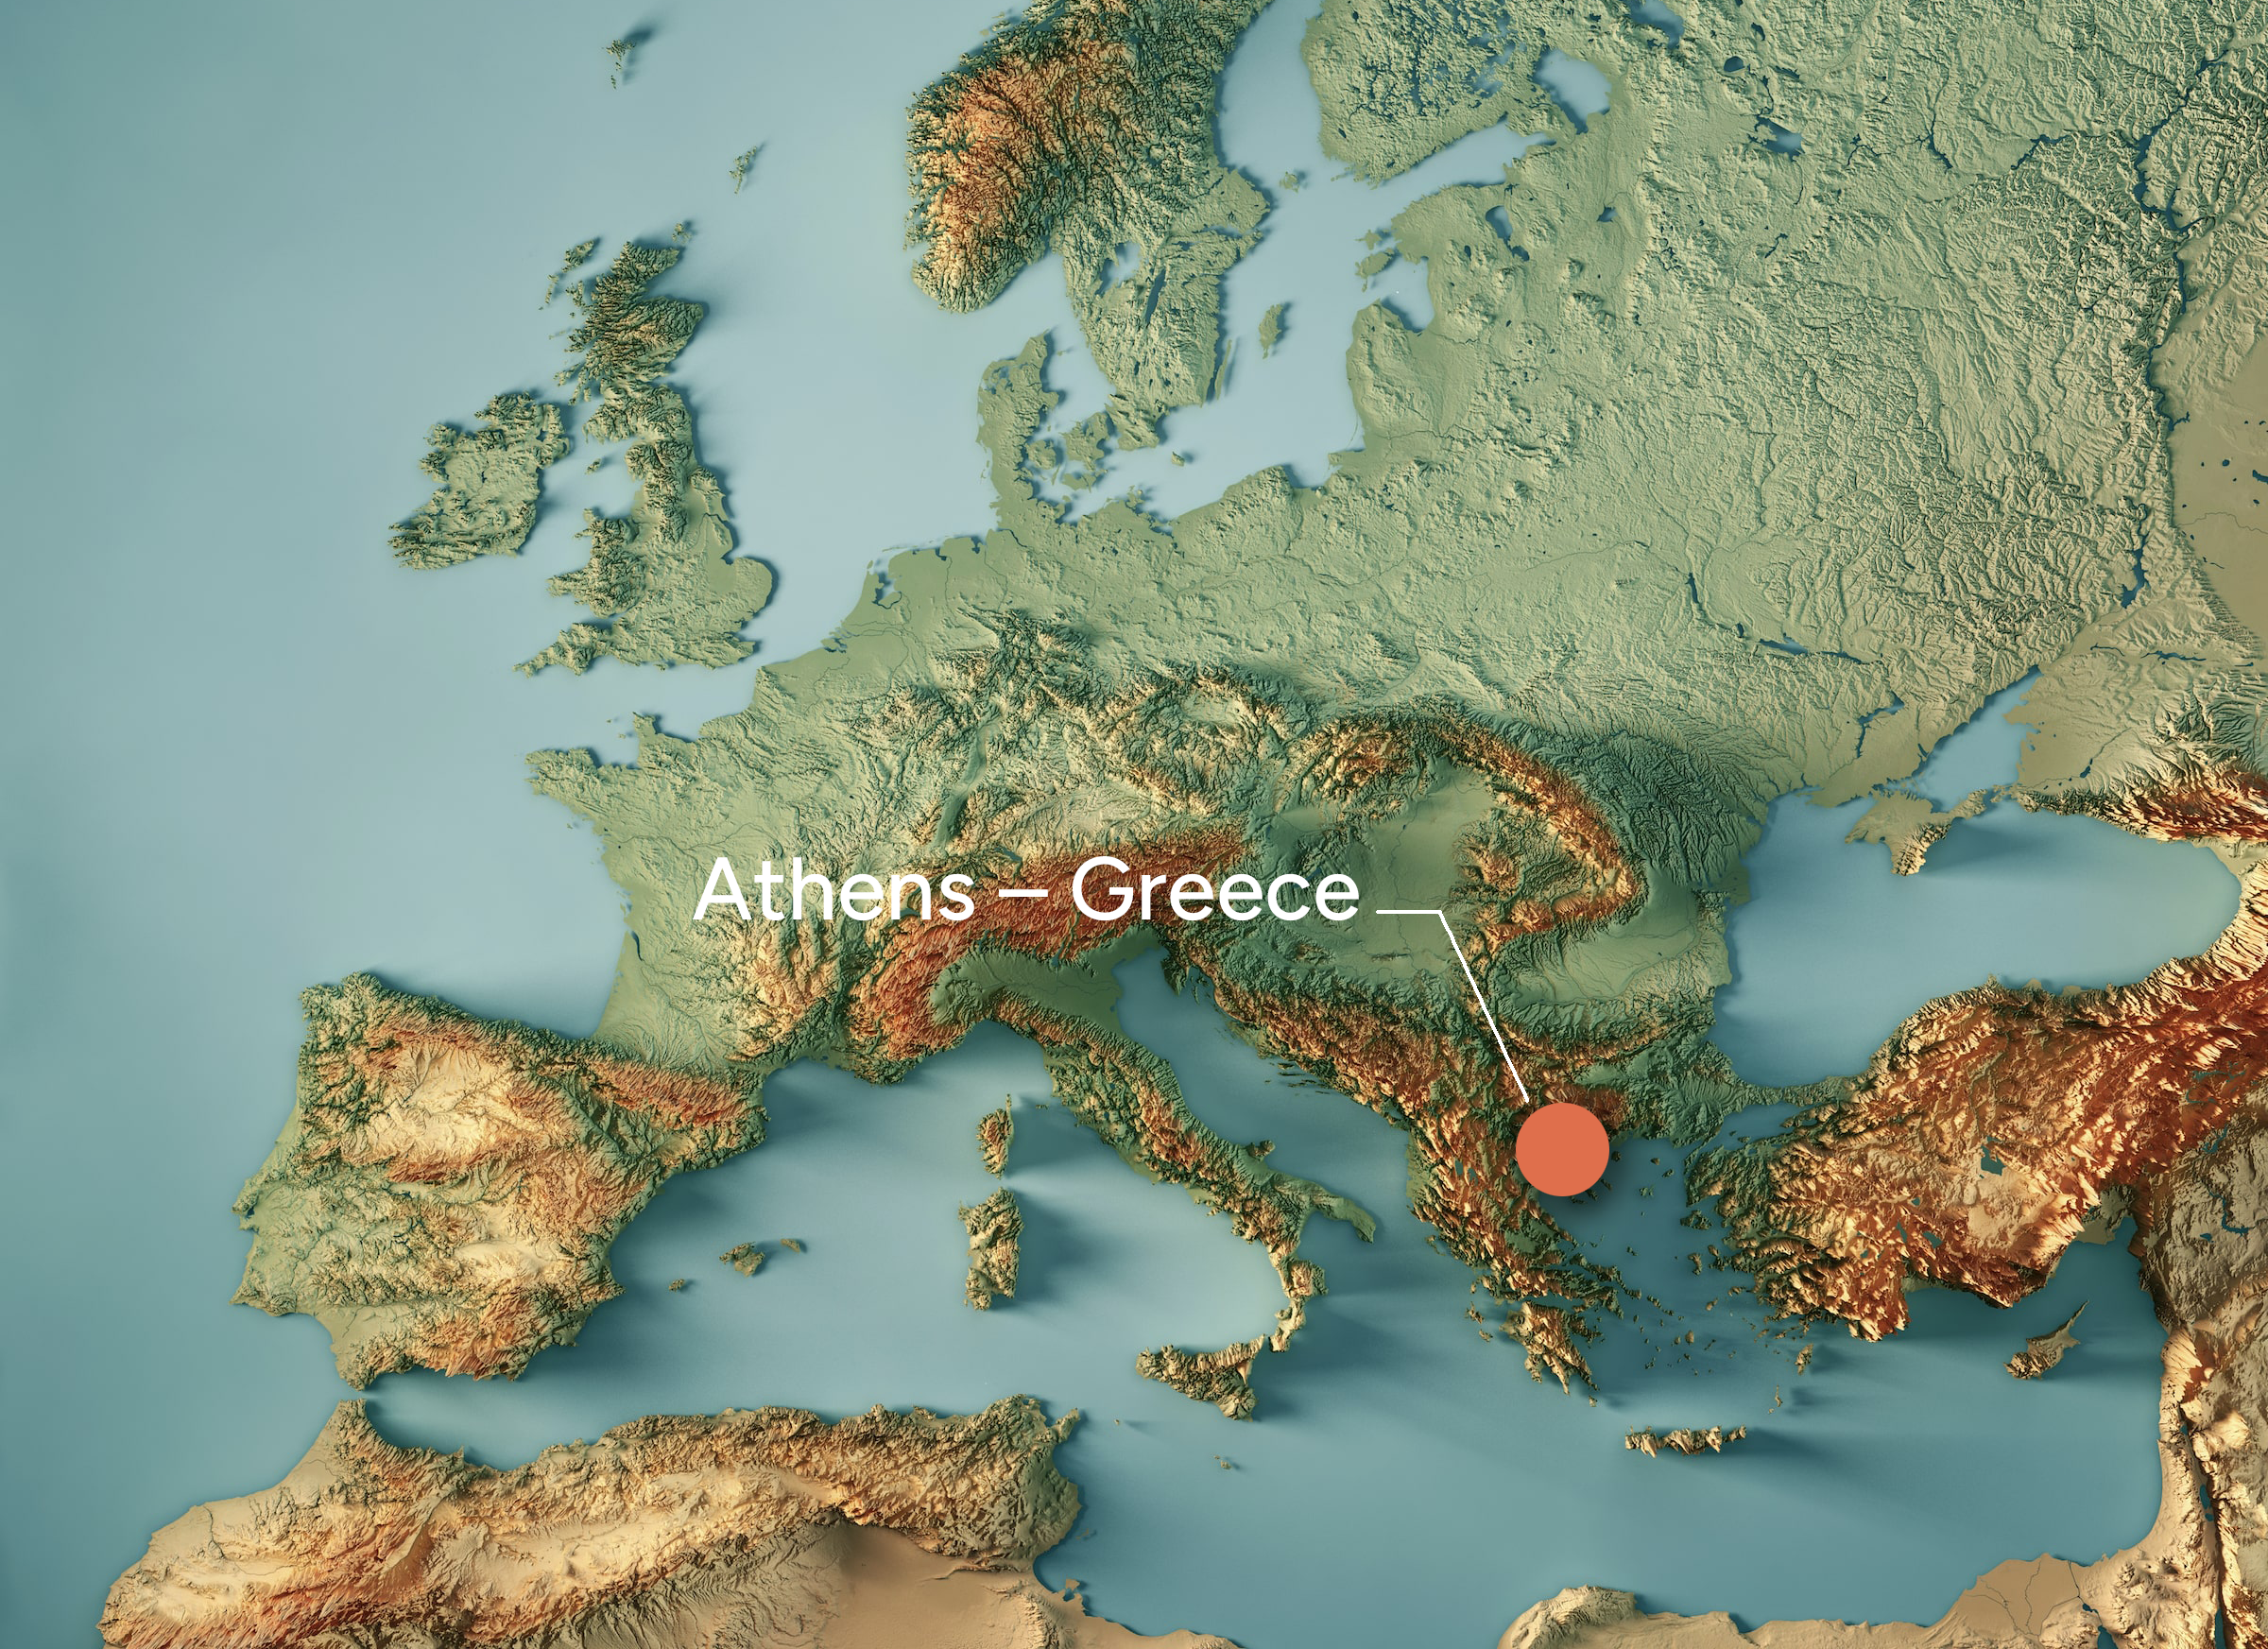 Topography map of Europe highlighting Athens, Greece